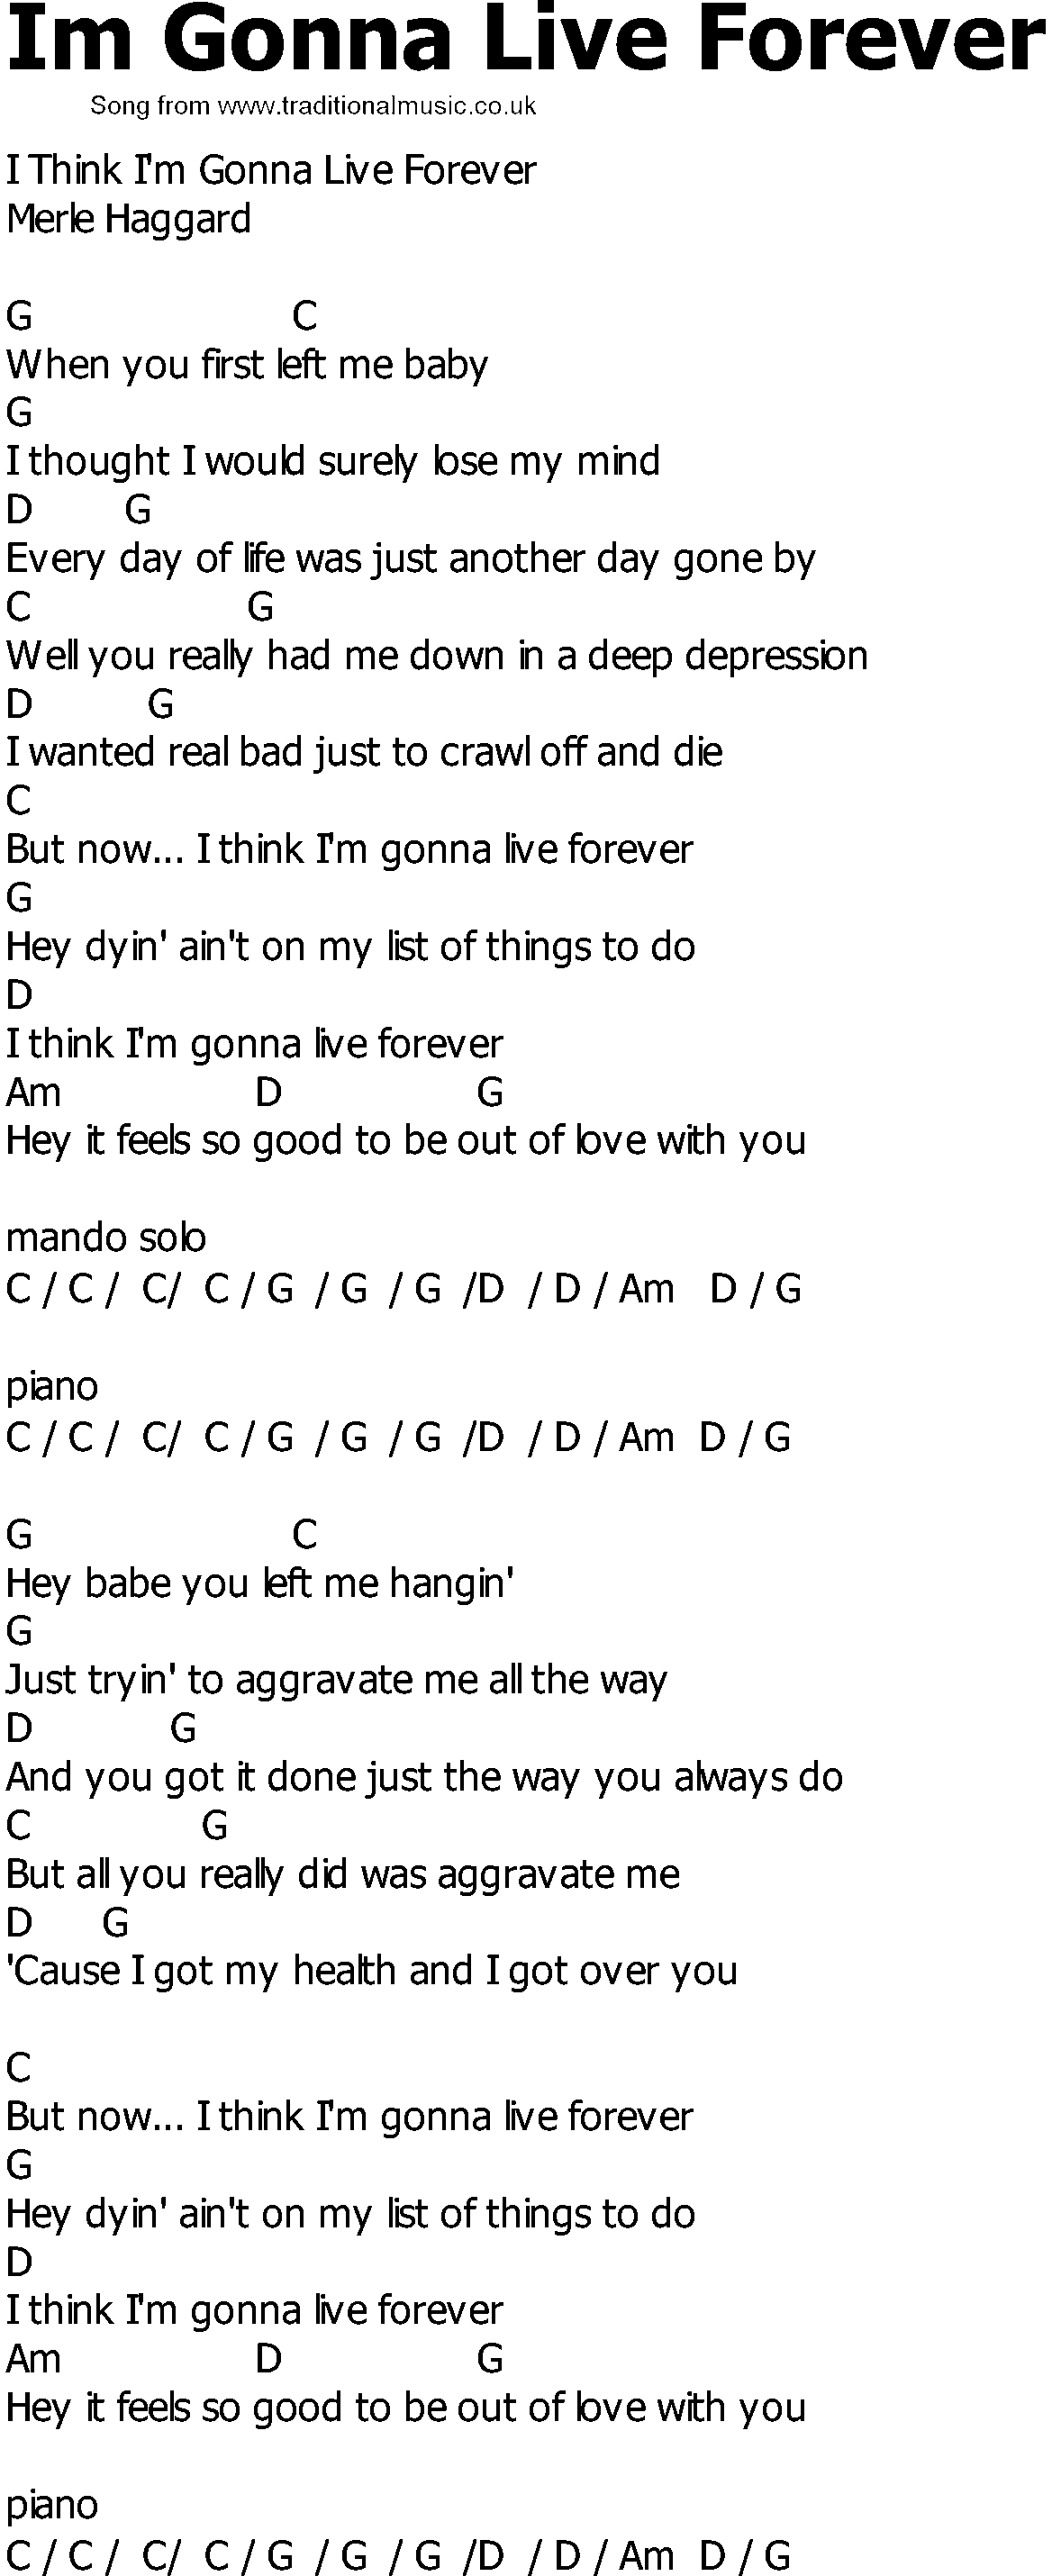 Old Country song lyrics with chords - Im Gonna Live Forever